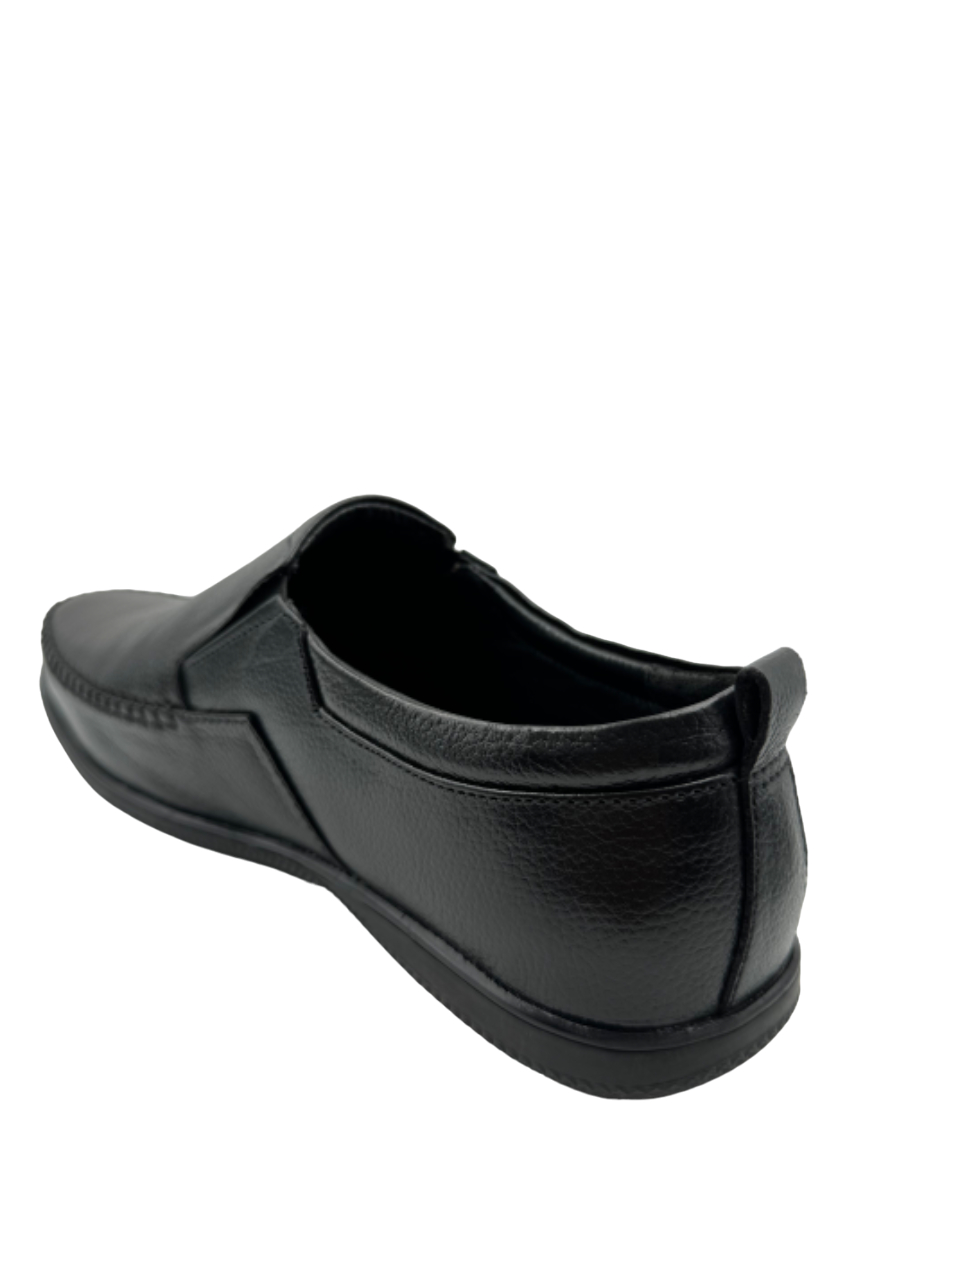 Ortho Soft Doctor Shoes GTSS 01